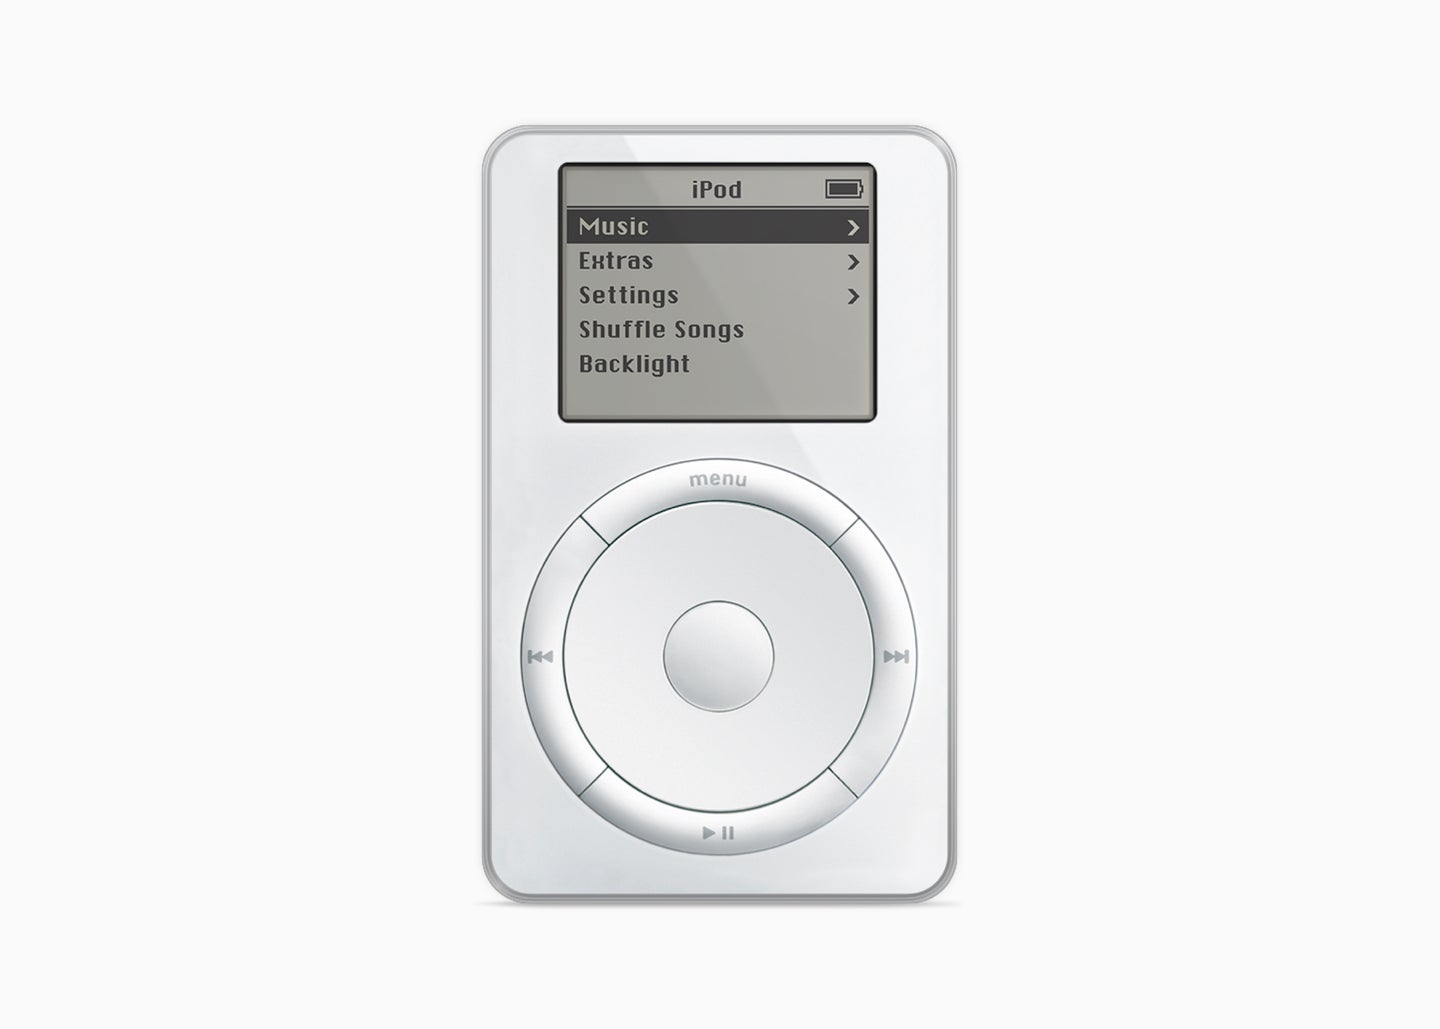 The first iPod came out in 2001.